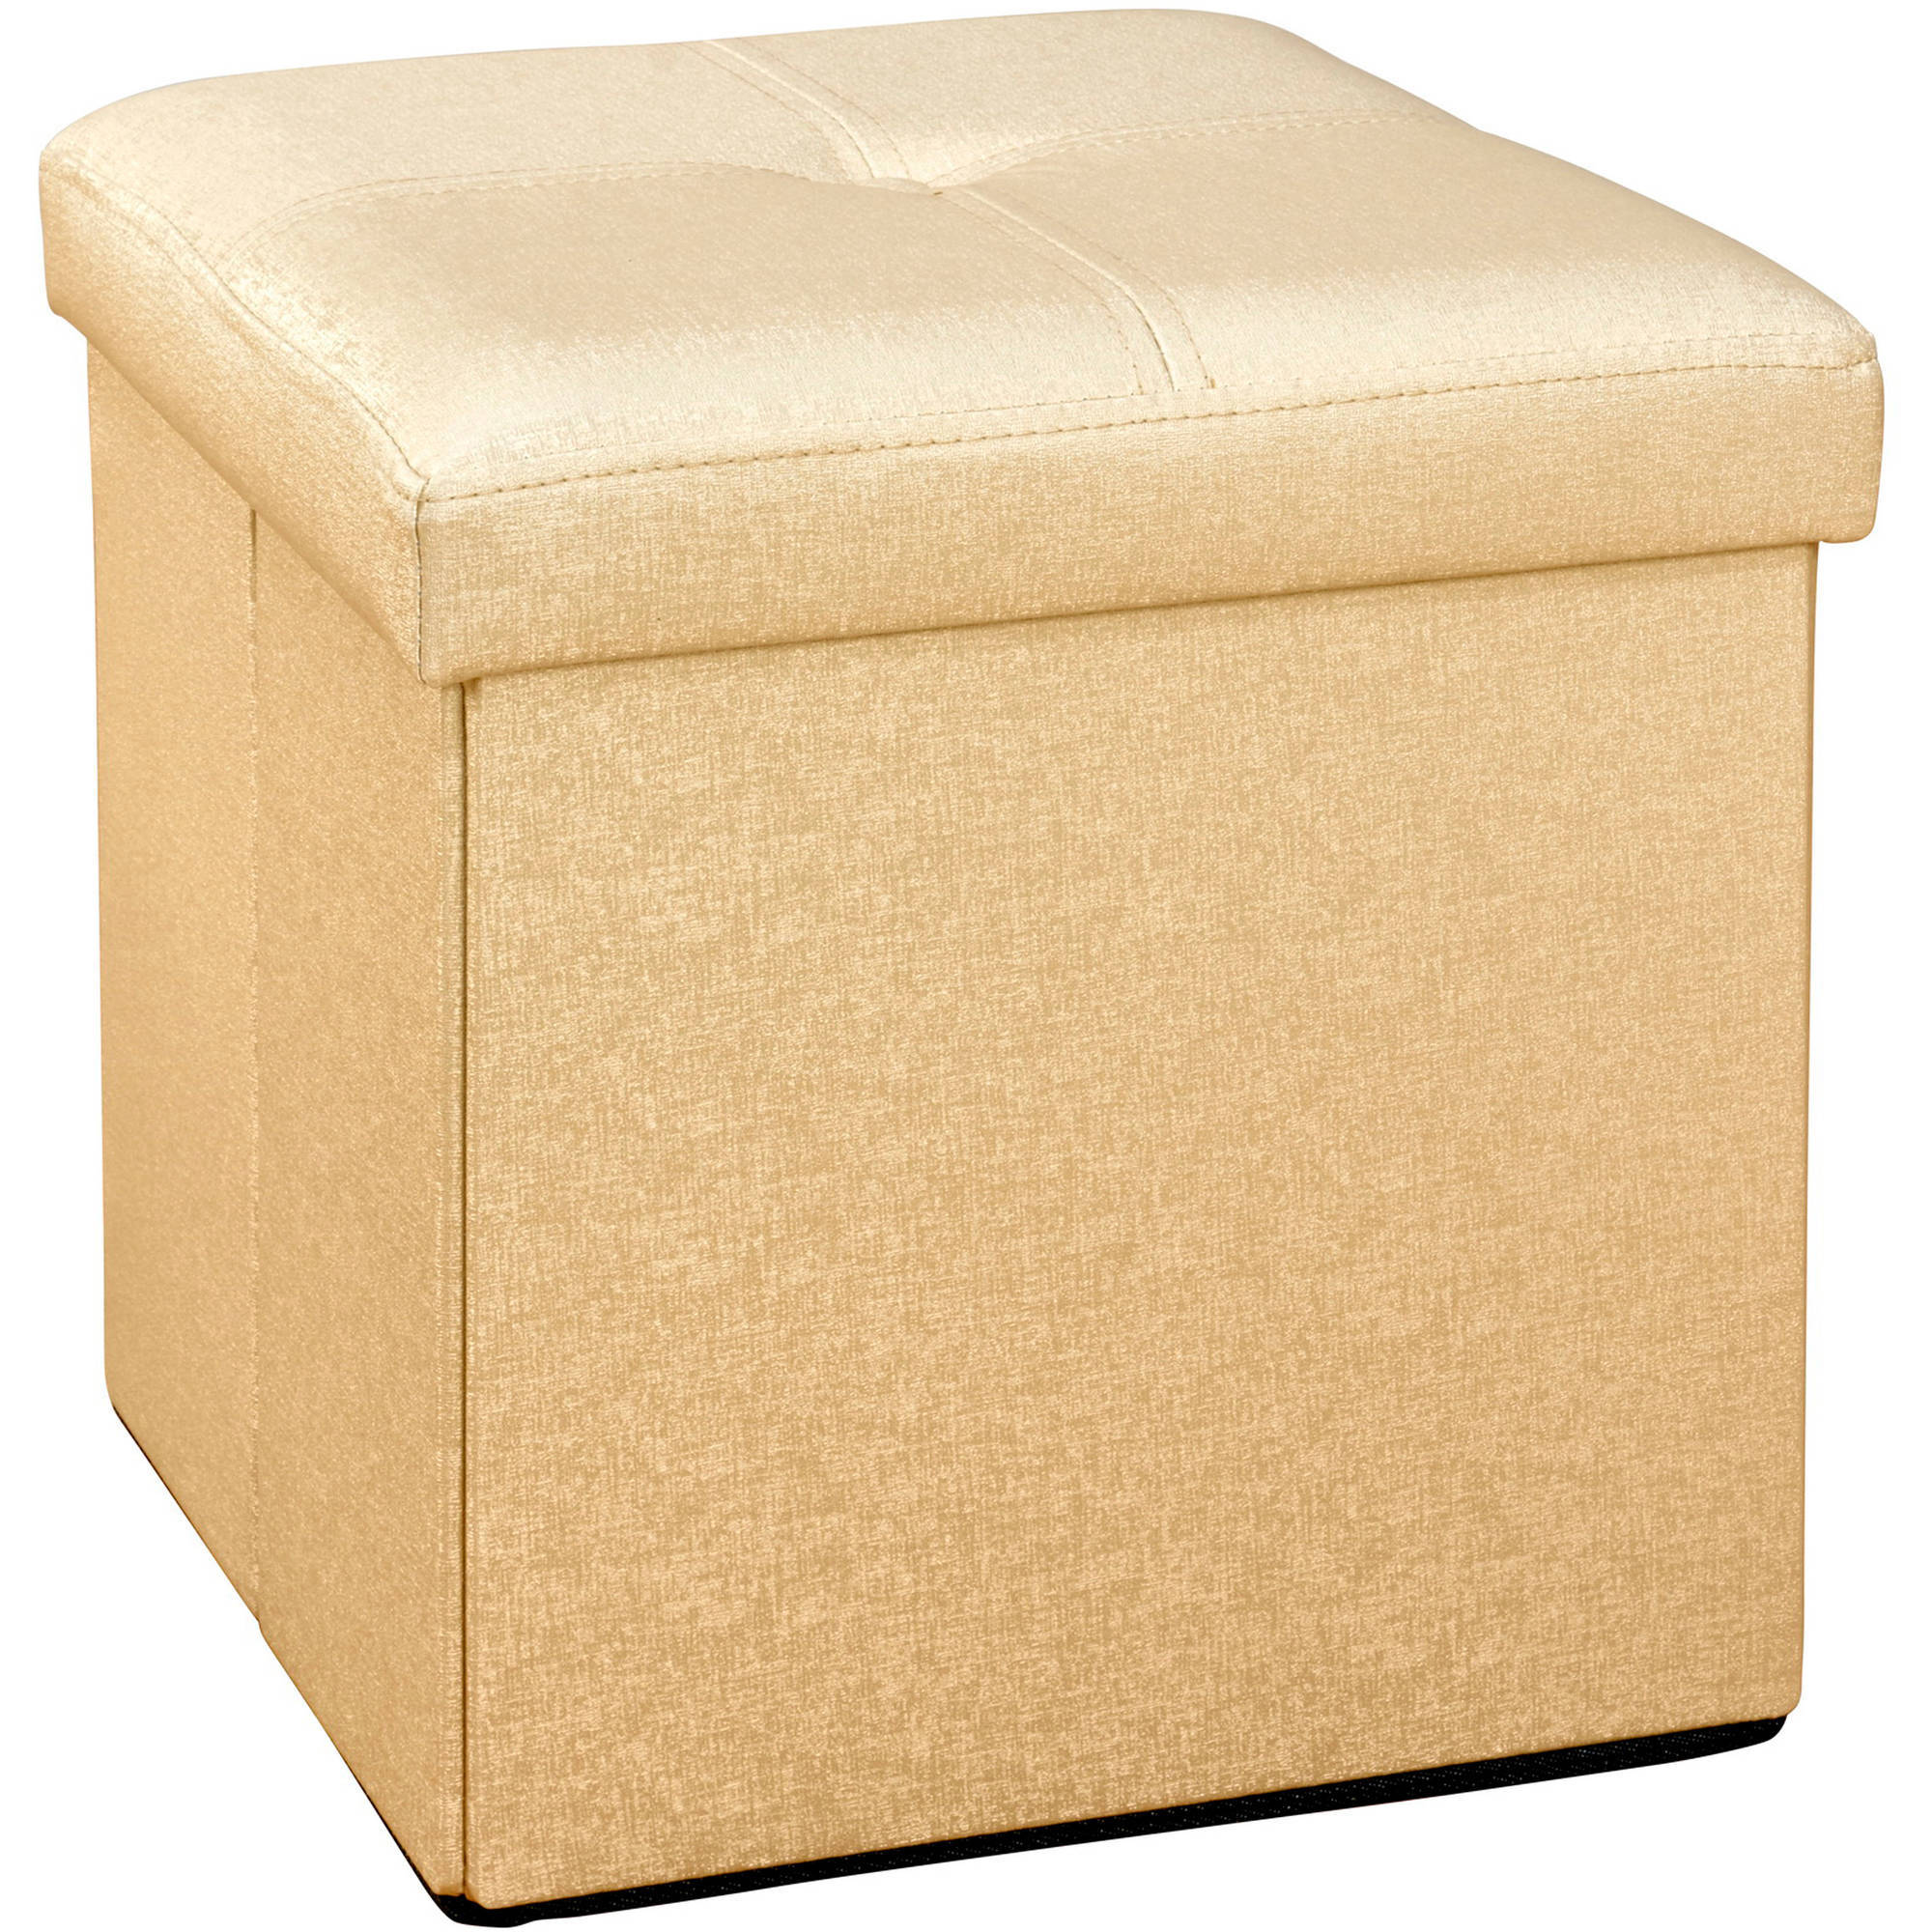 Simplify Faux Leather Folding Storage Ottoman Cube in Metallic Gold - image 1 of 10